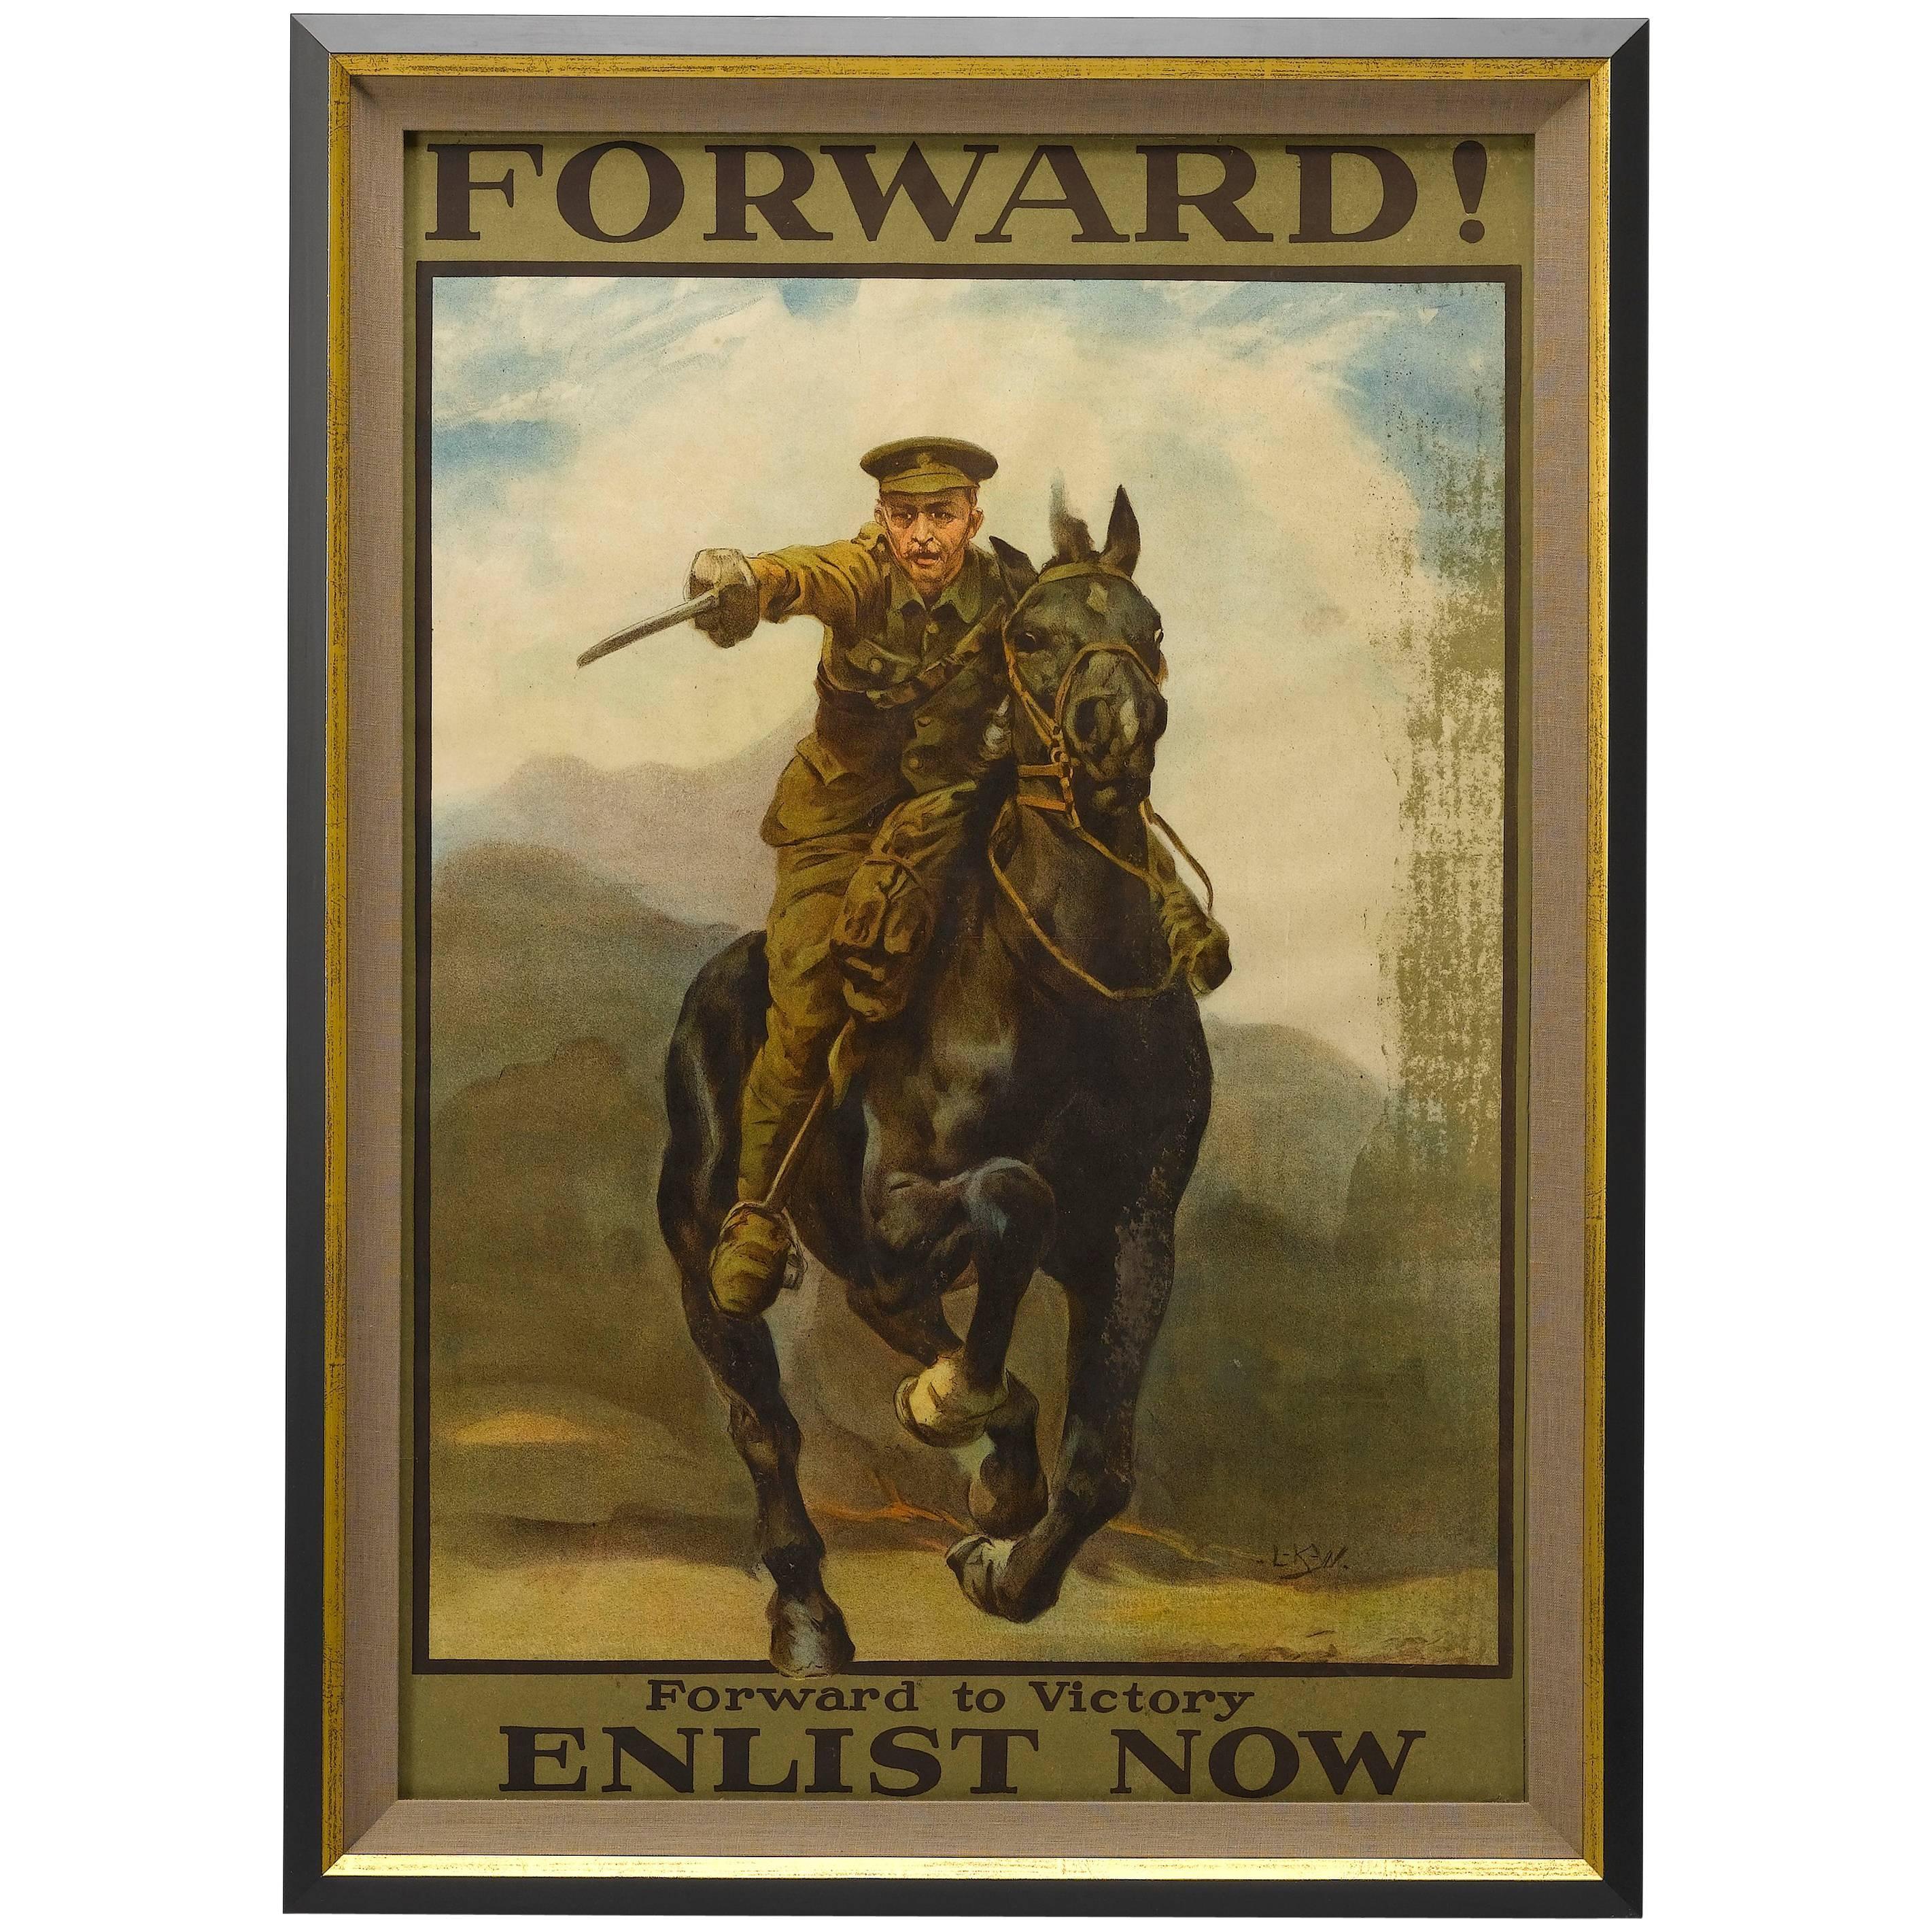 "Forward! to Victory, Enlist Now" Vintage WWI British Recruitment Poster, 1915